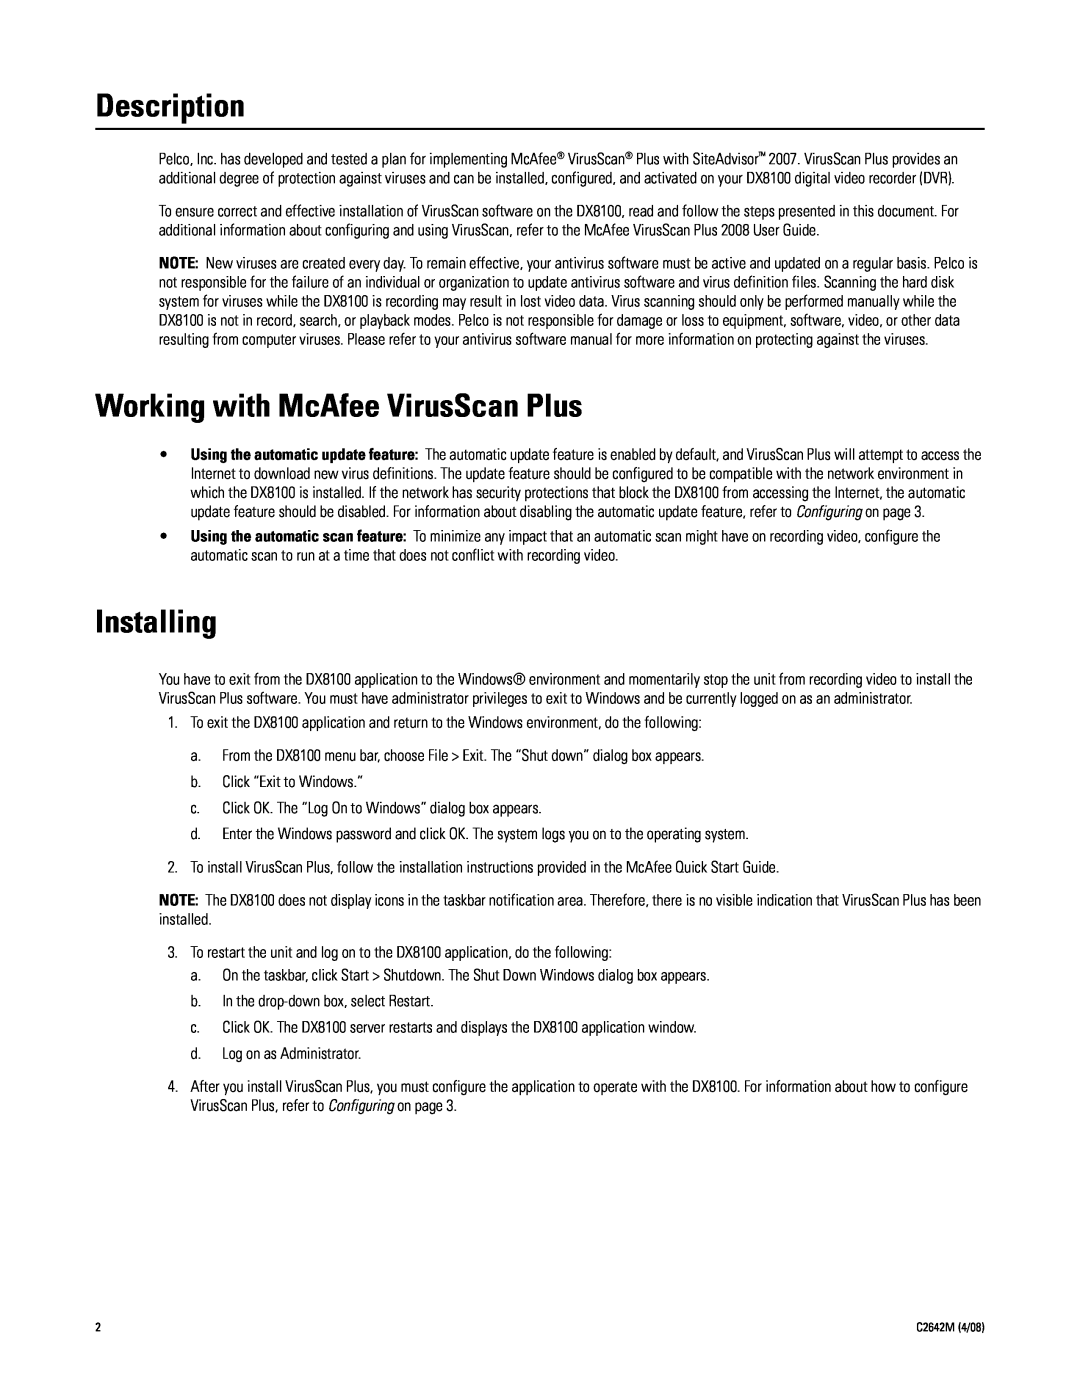 Pelco dx8100 installation instructions Description, Working with McAfee VirusScan Plus, Installing 